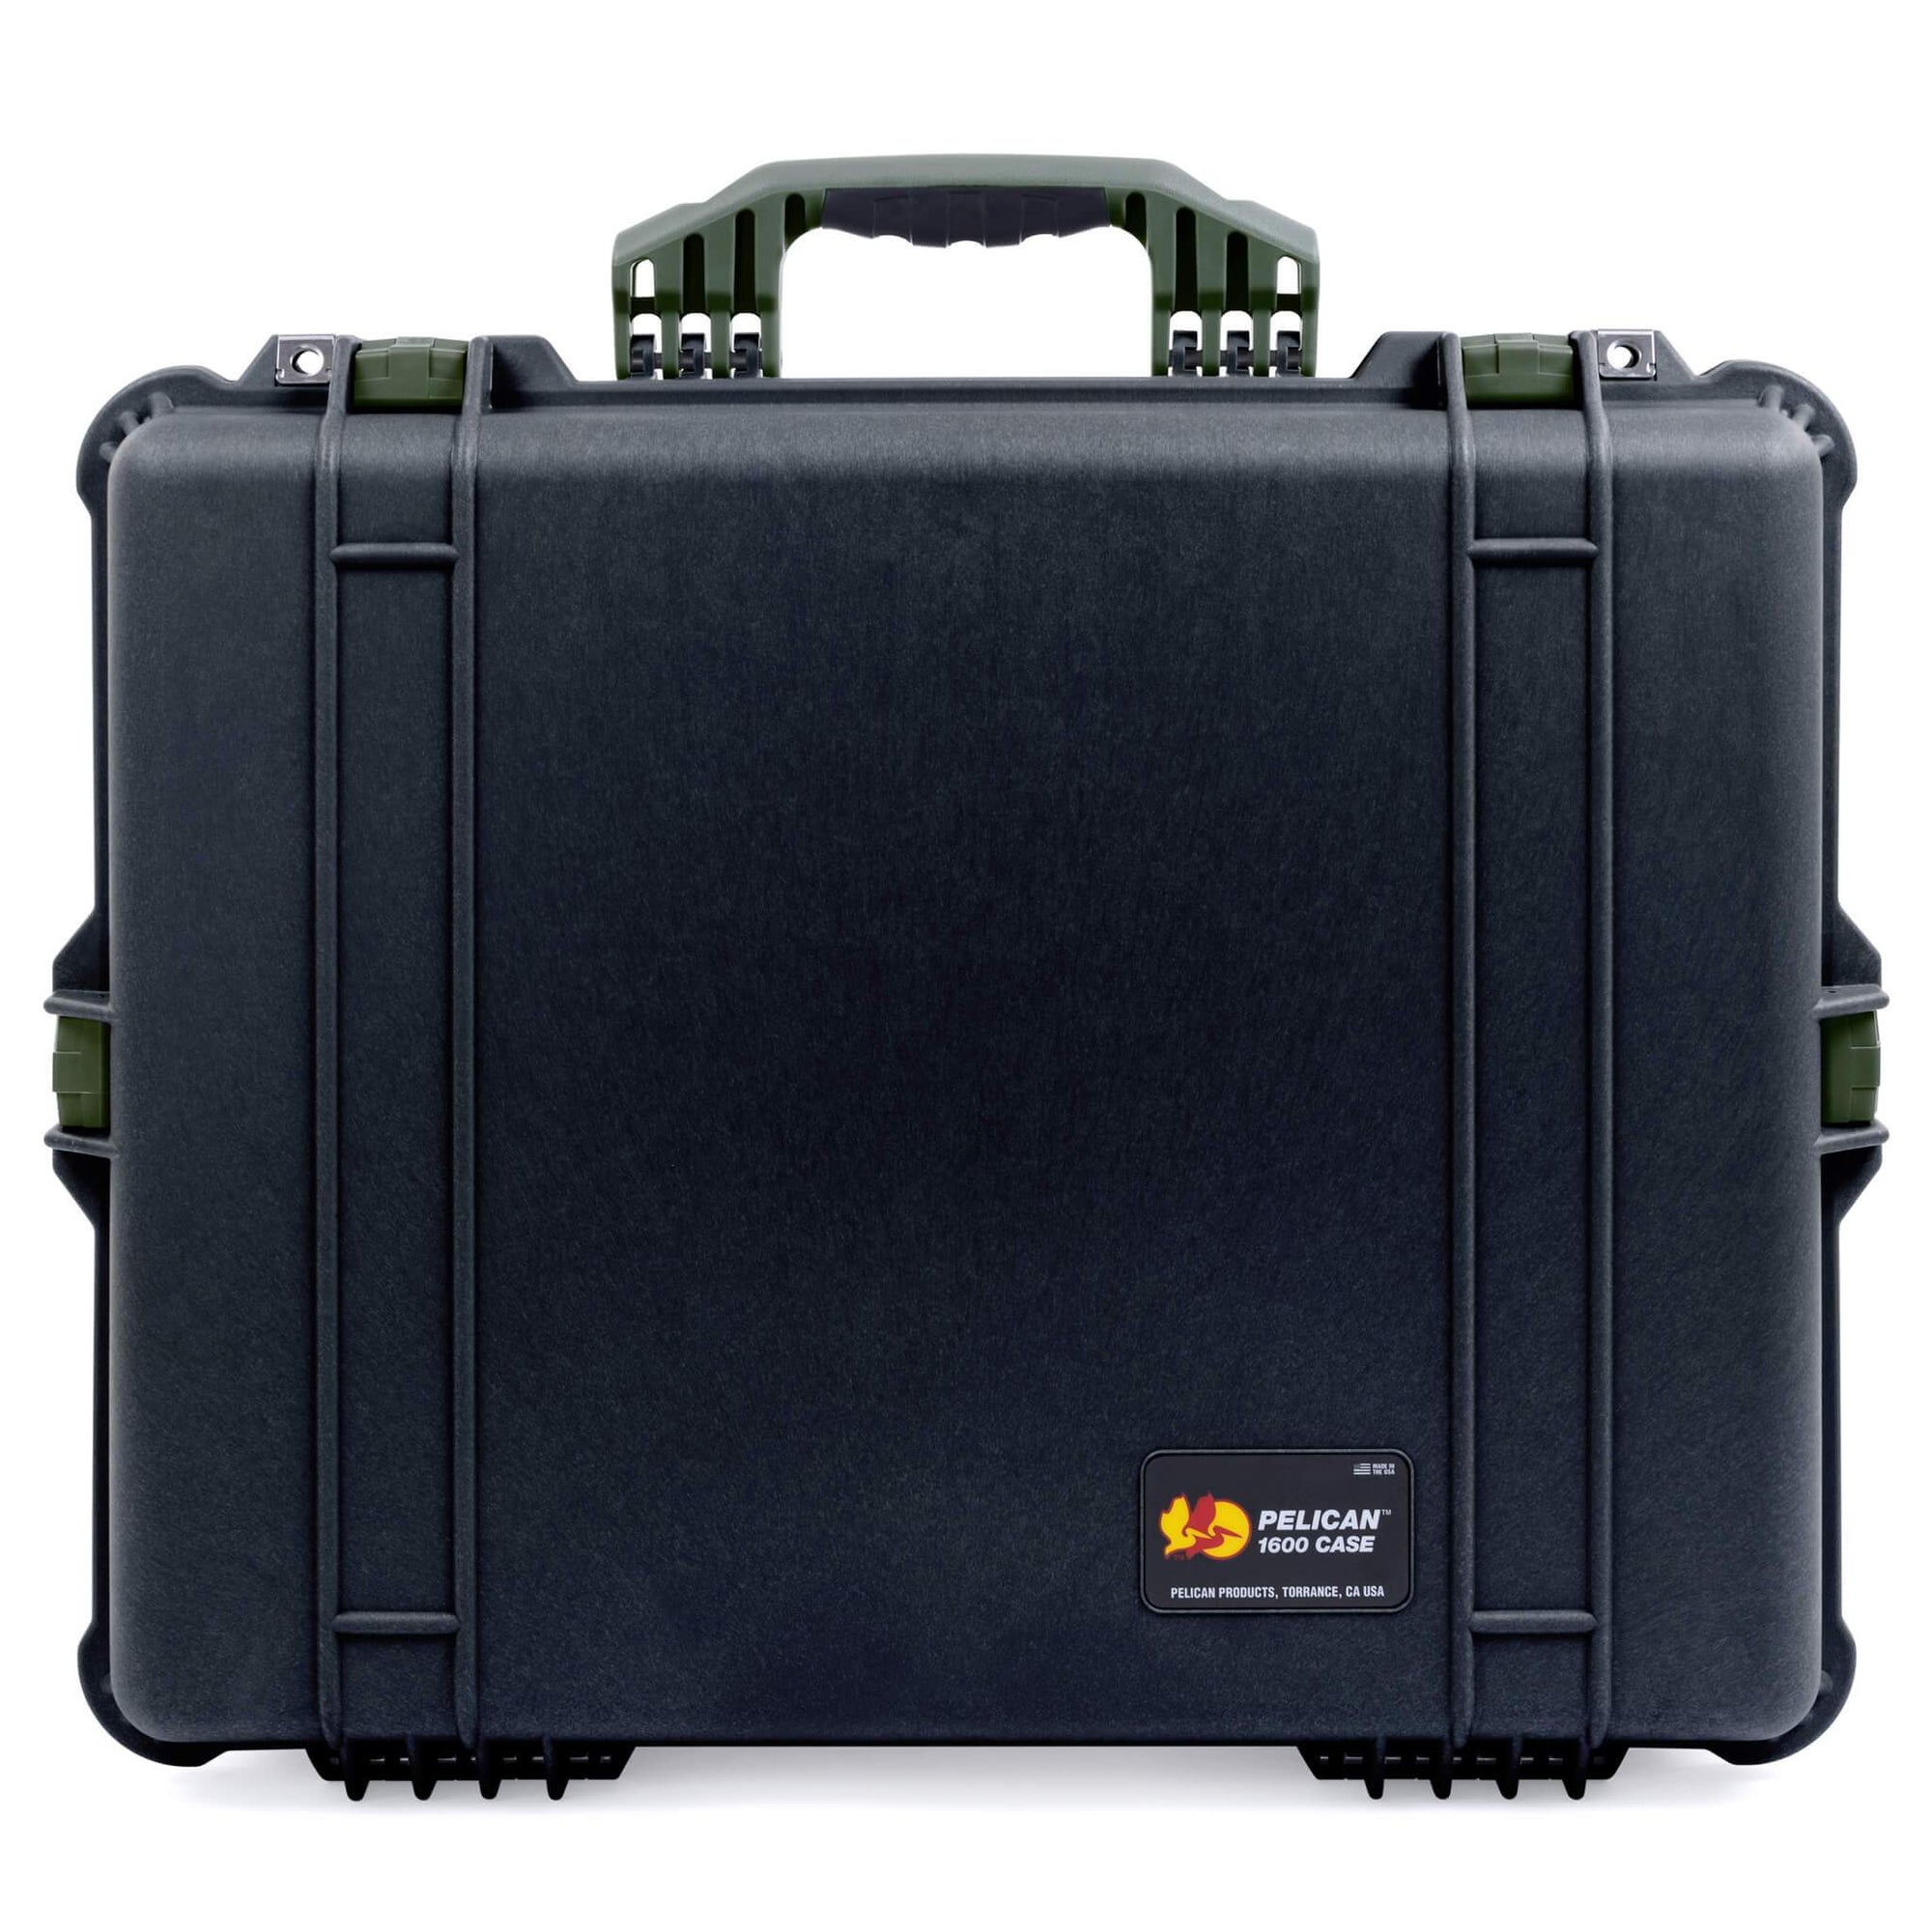 Pelican 1600 Case, Black with OD Green Handle & Latches ColorCase 